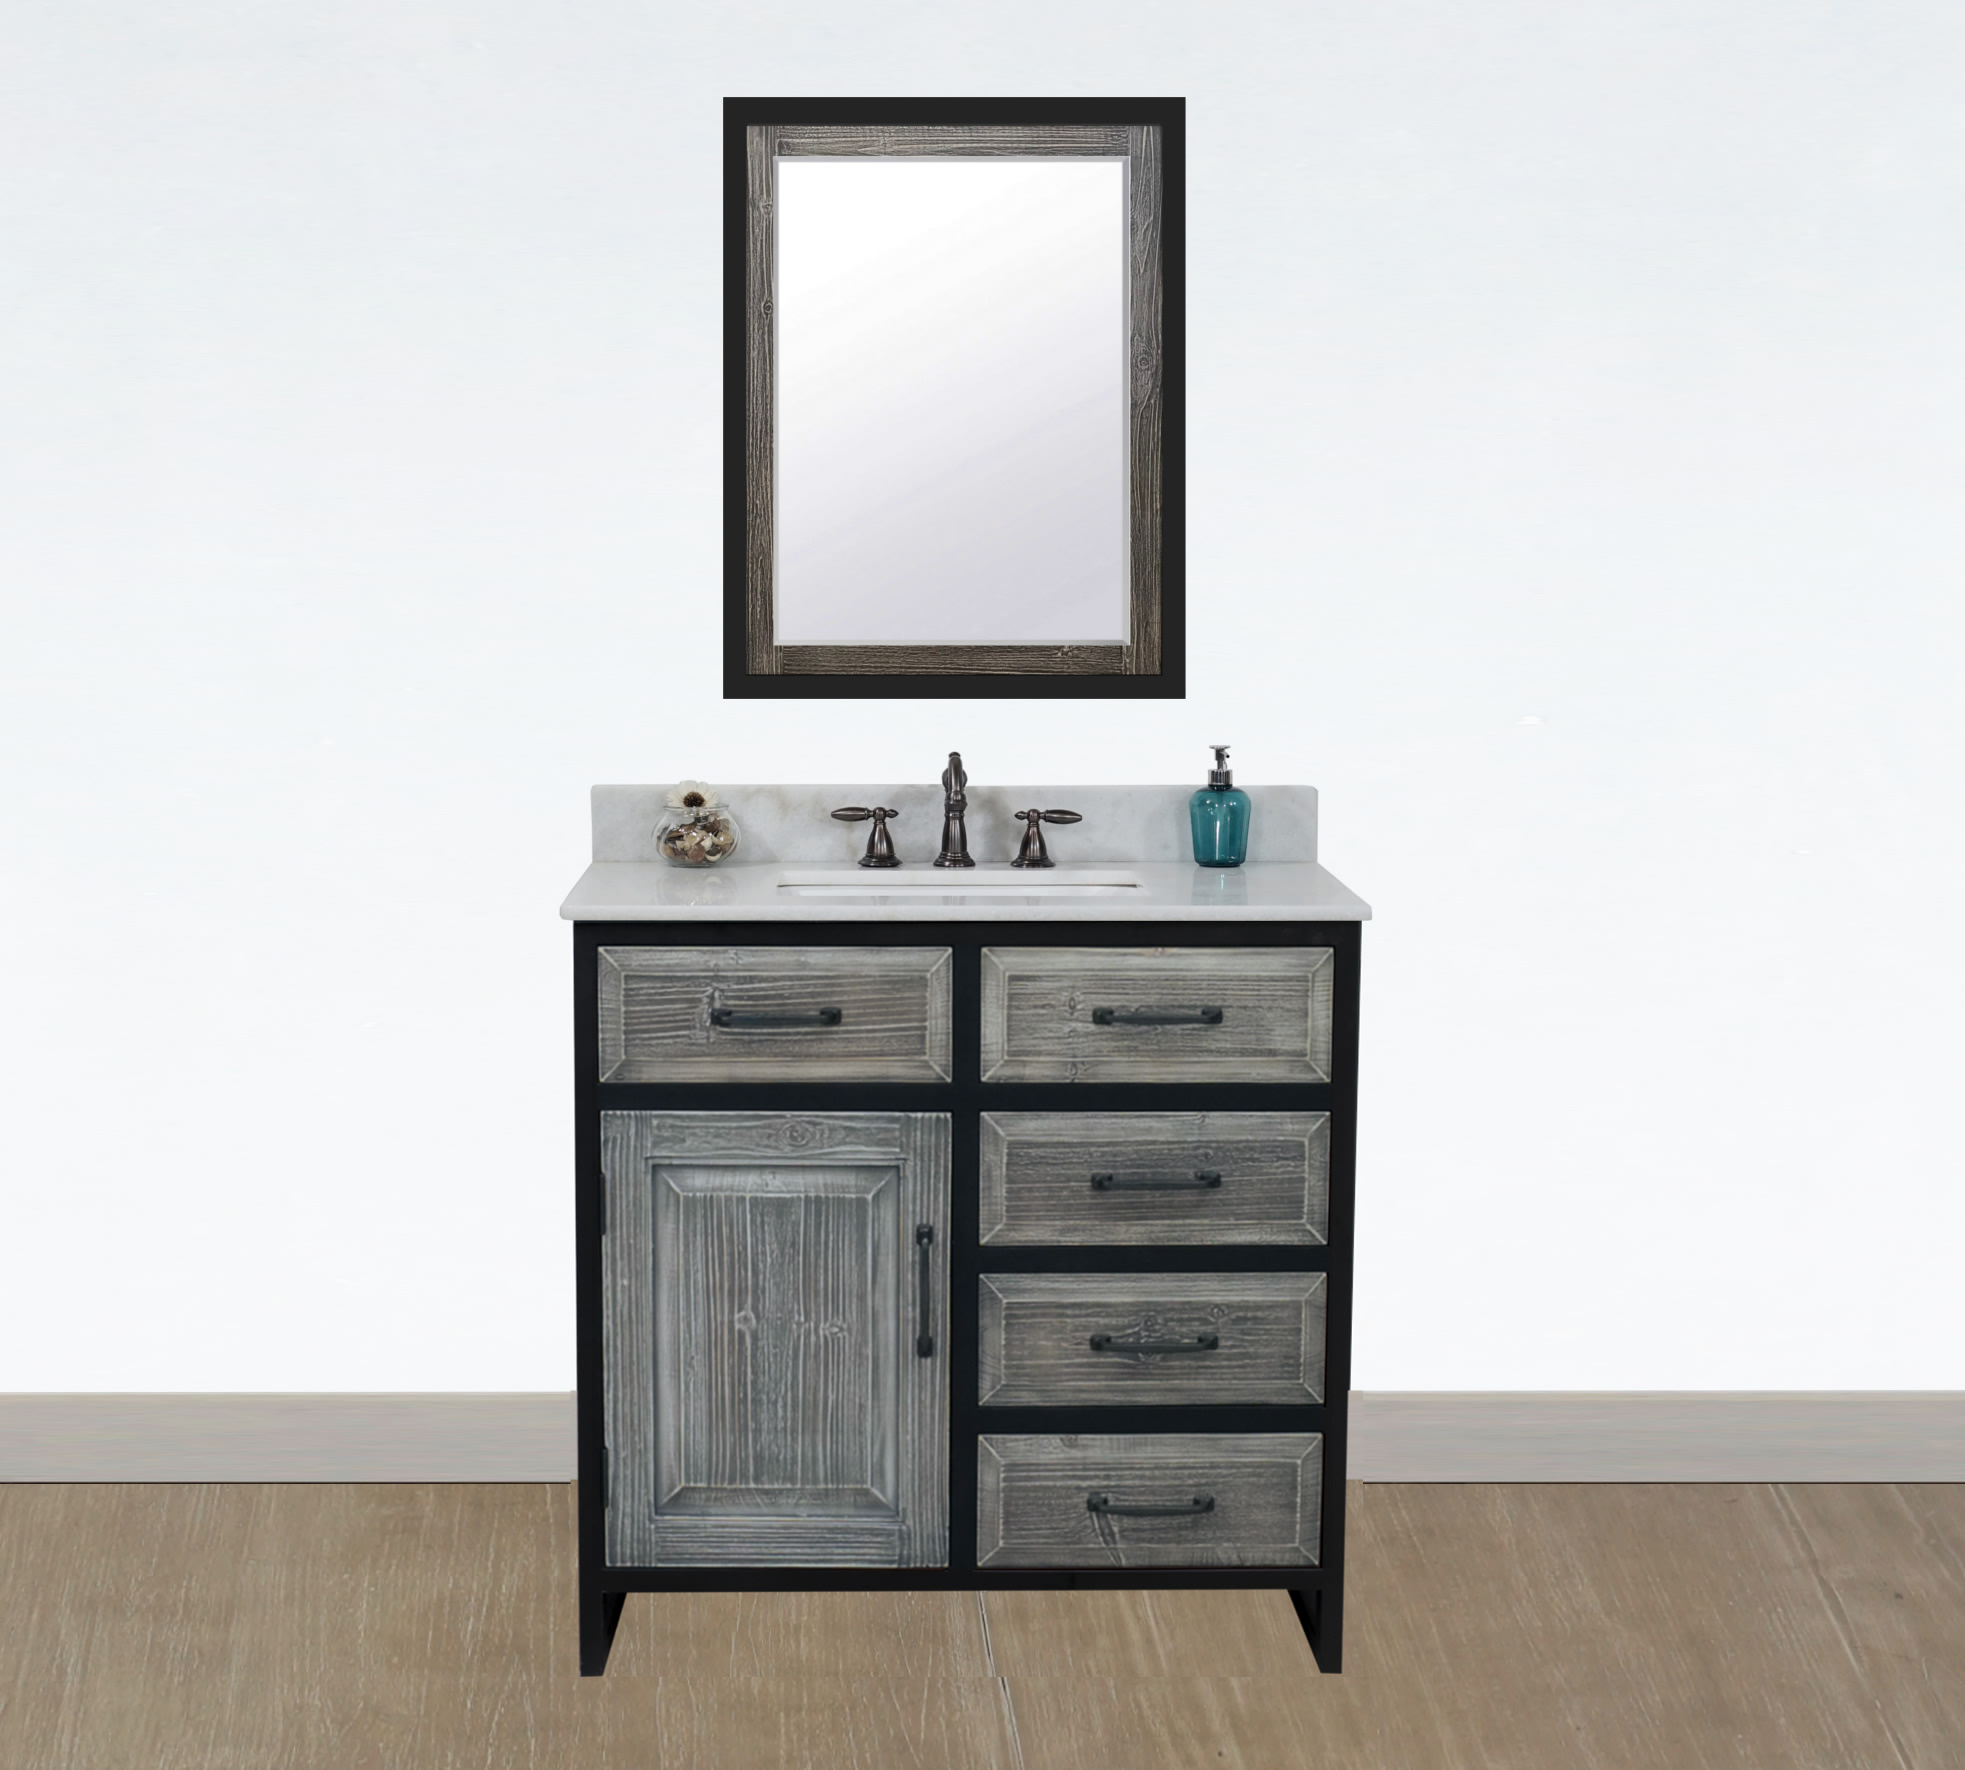 36" Rustic Solid Fir Single Sink with Iron Frame Vanity in Grey Driftwood - No Faucet with Countertop Options